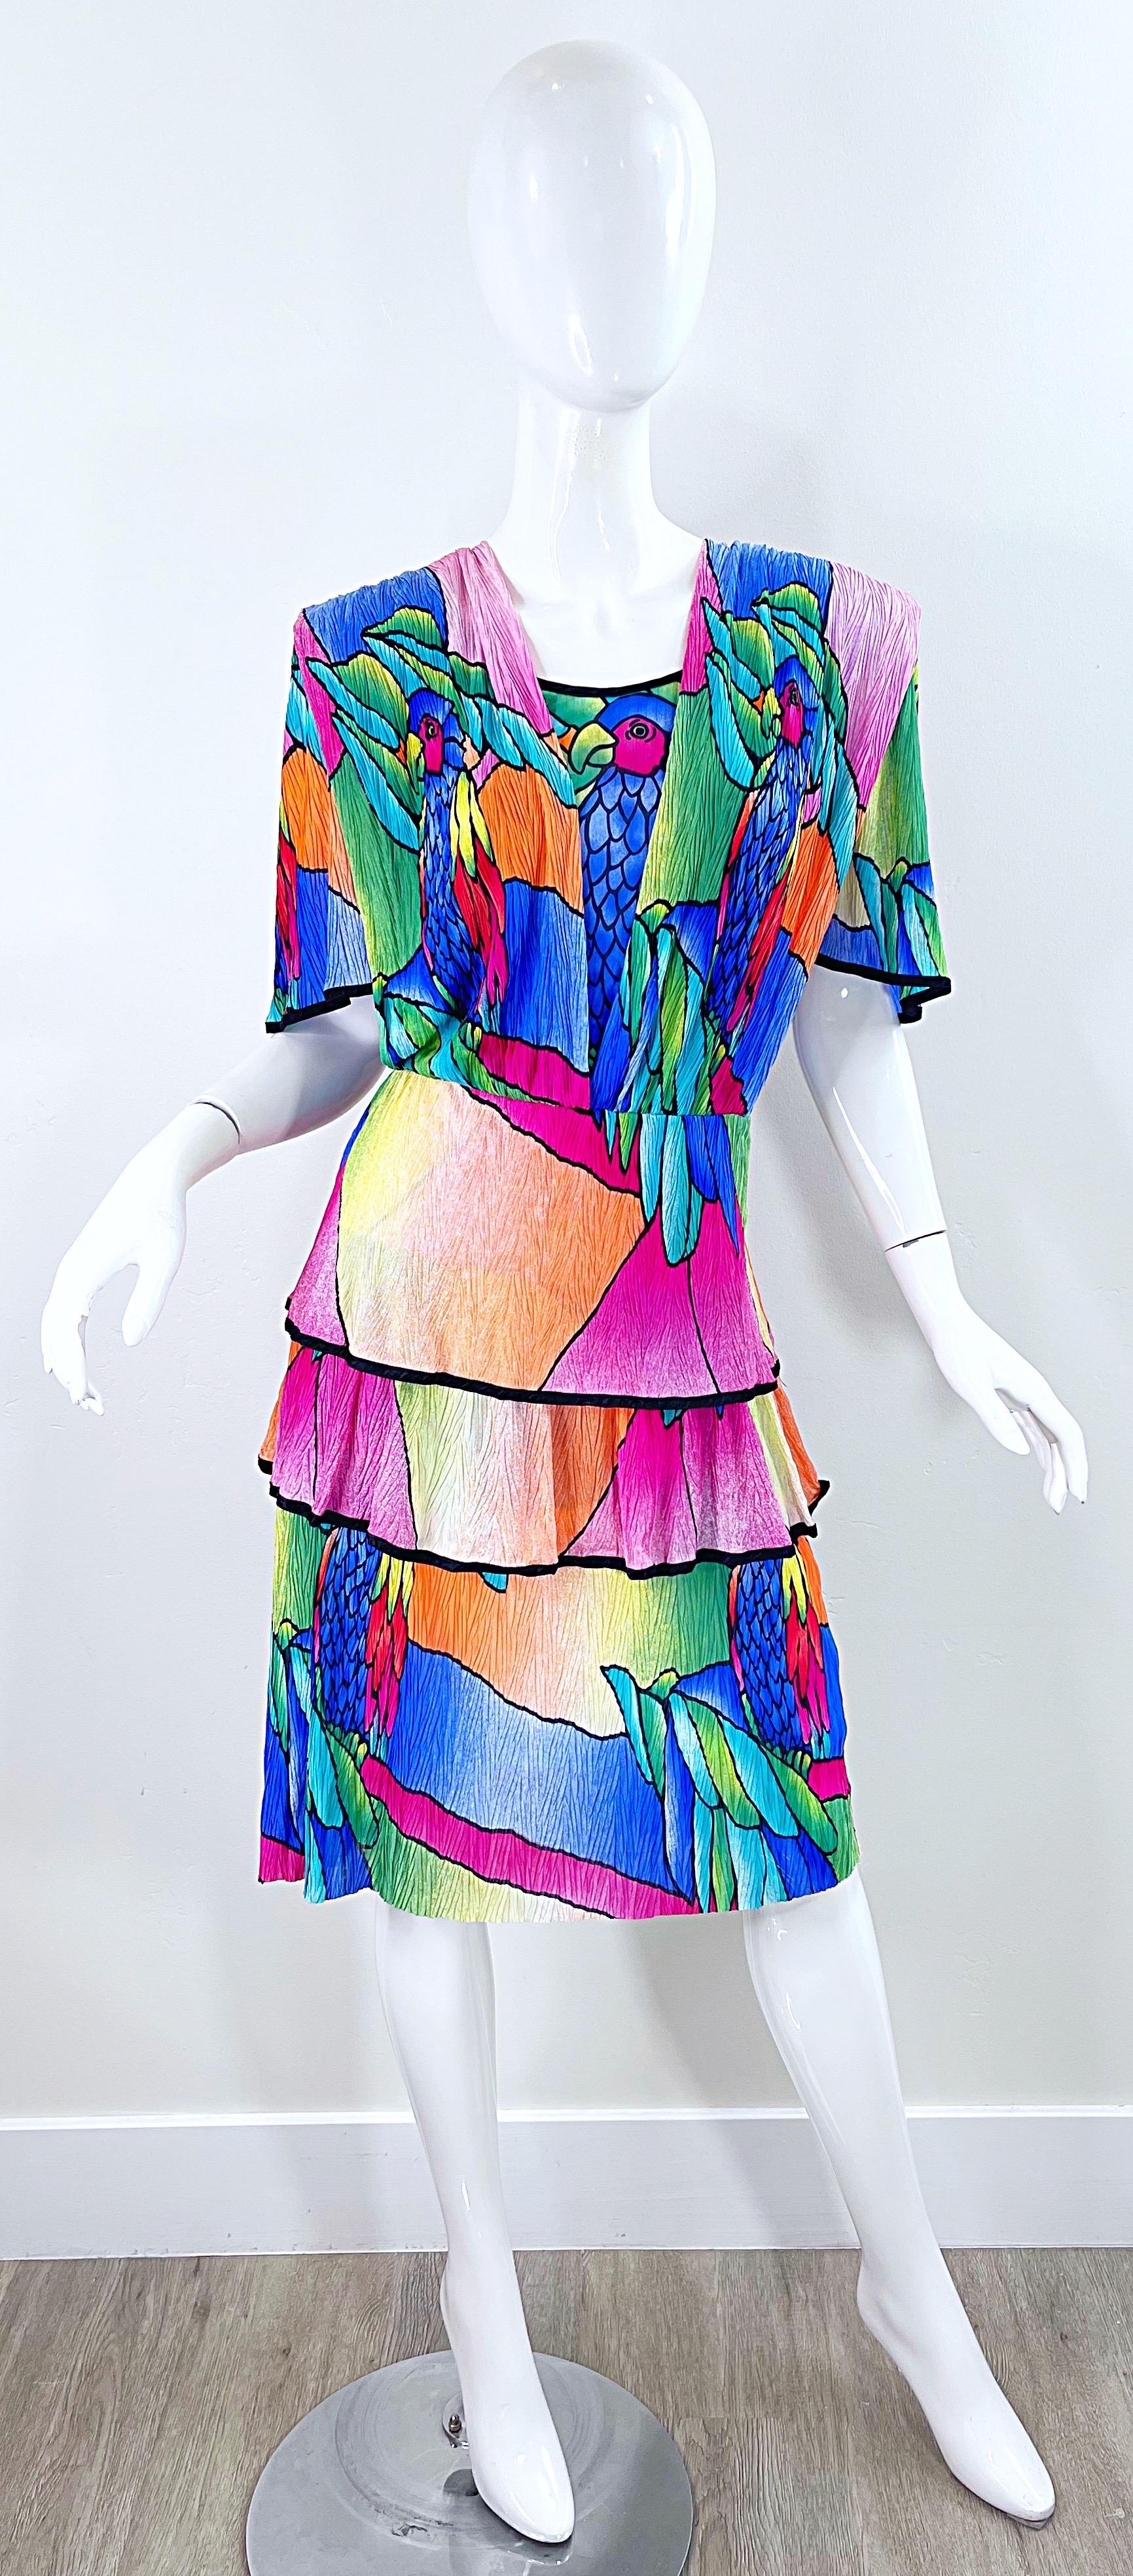 Amazing 1980s PUSZTA novelty parrot print margaritaville short sleeve colorful dress ! Shoulder pads at each shoulder. Hidden zipper up the back. The perfect statement dress for any party !
In great condition
Approximately Size Medium /